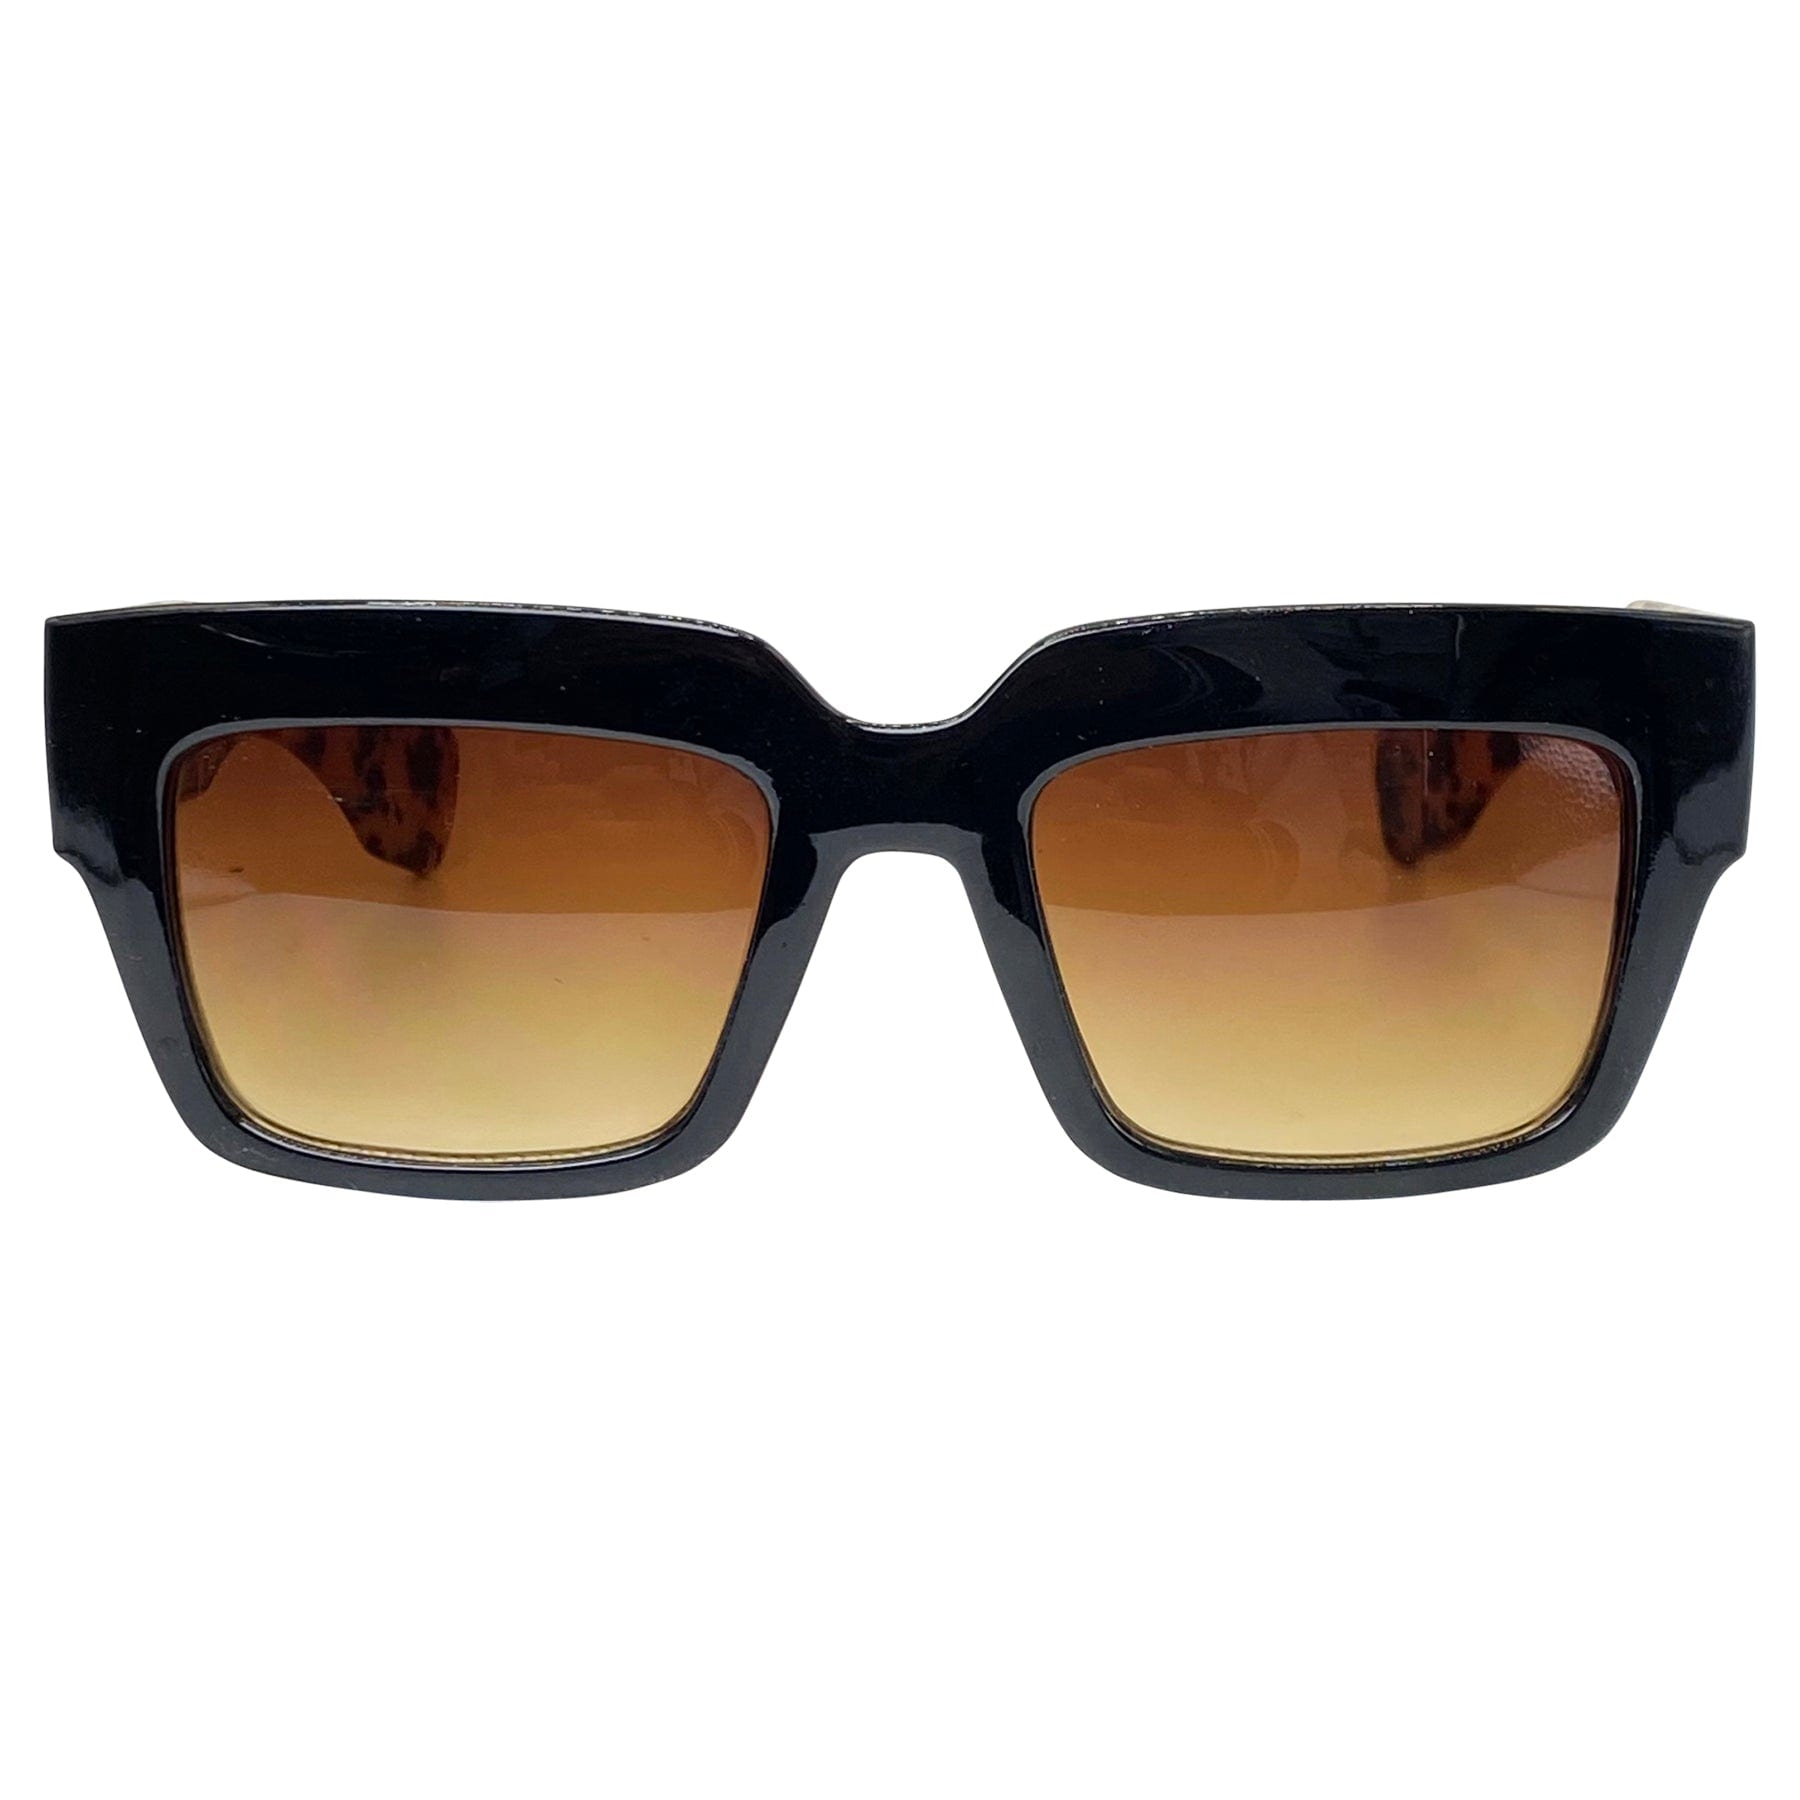 mod 80s sunglasses with animal print temples and amber tint lens